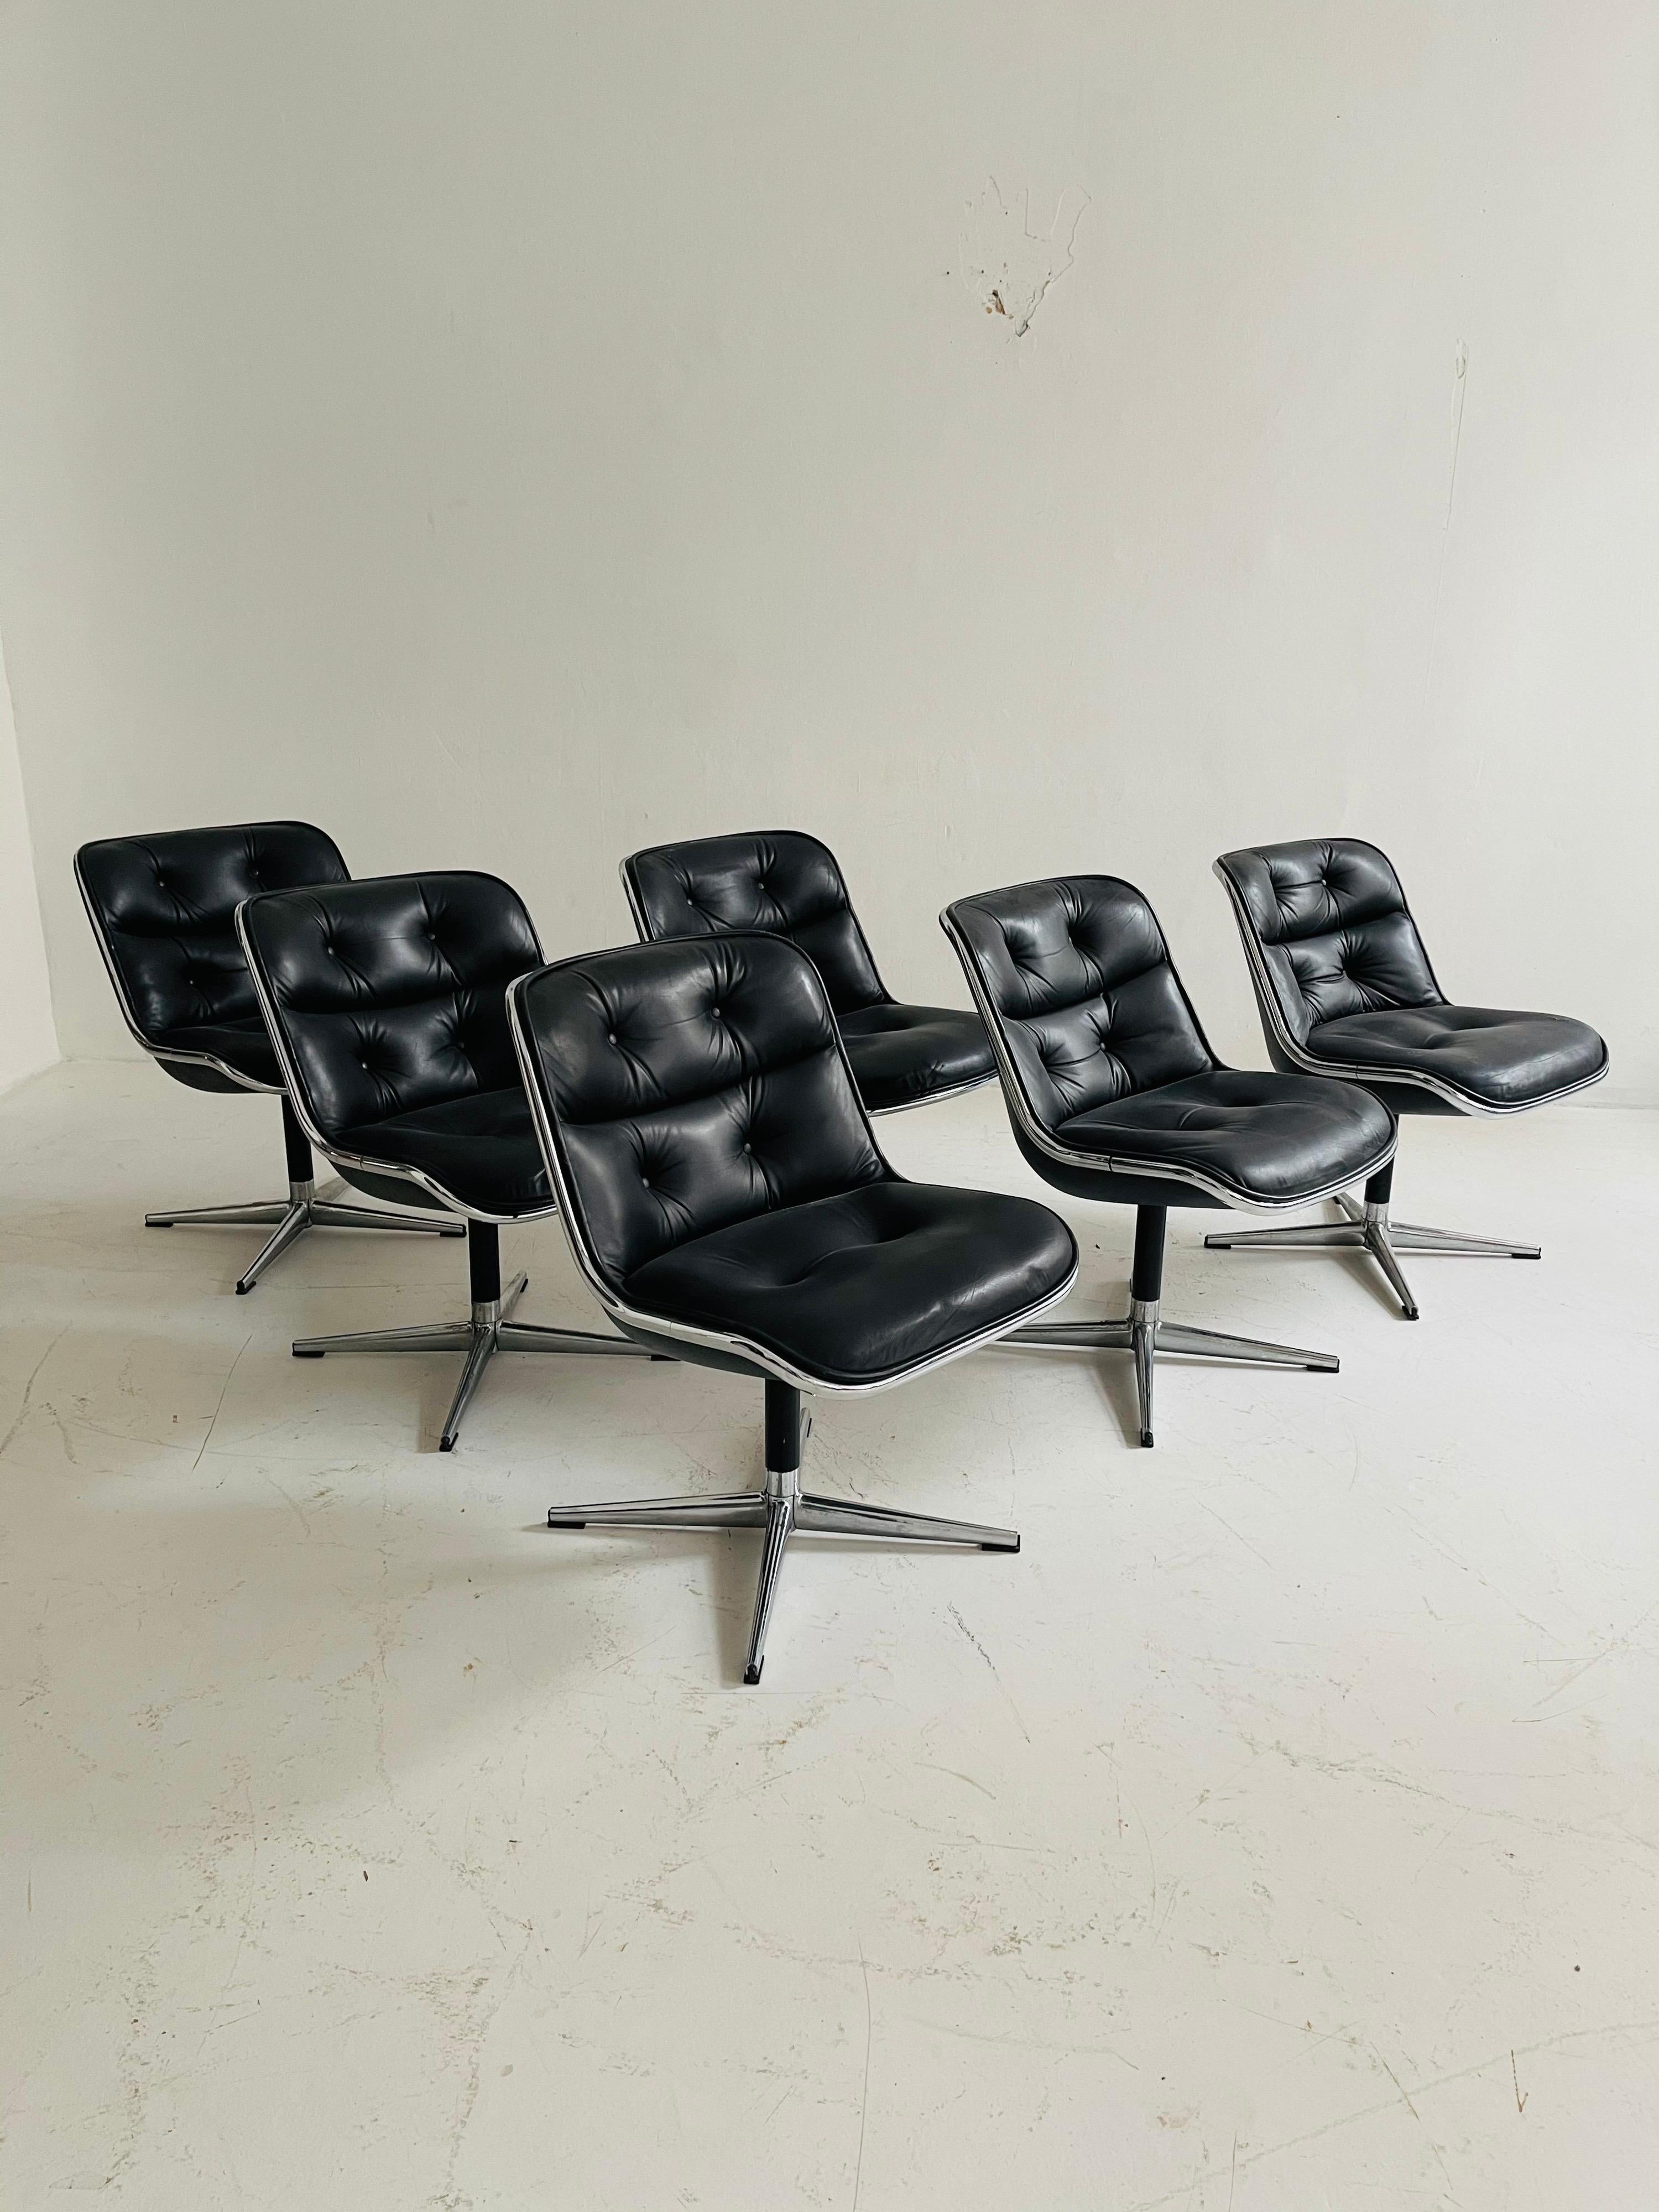 Pollack Executive Chair by Charles Pollack for Knoll Set of Six Leather, 1960s For Sale 9